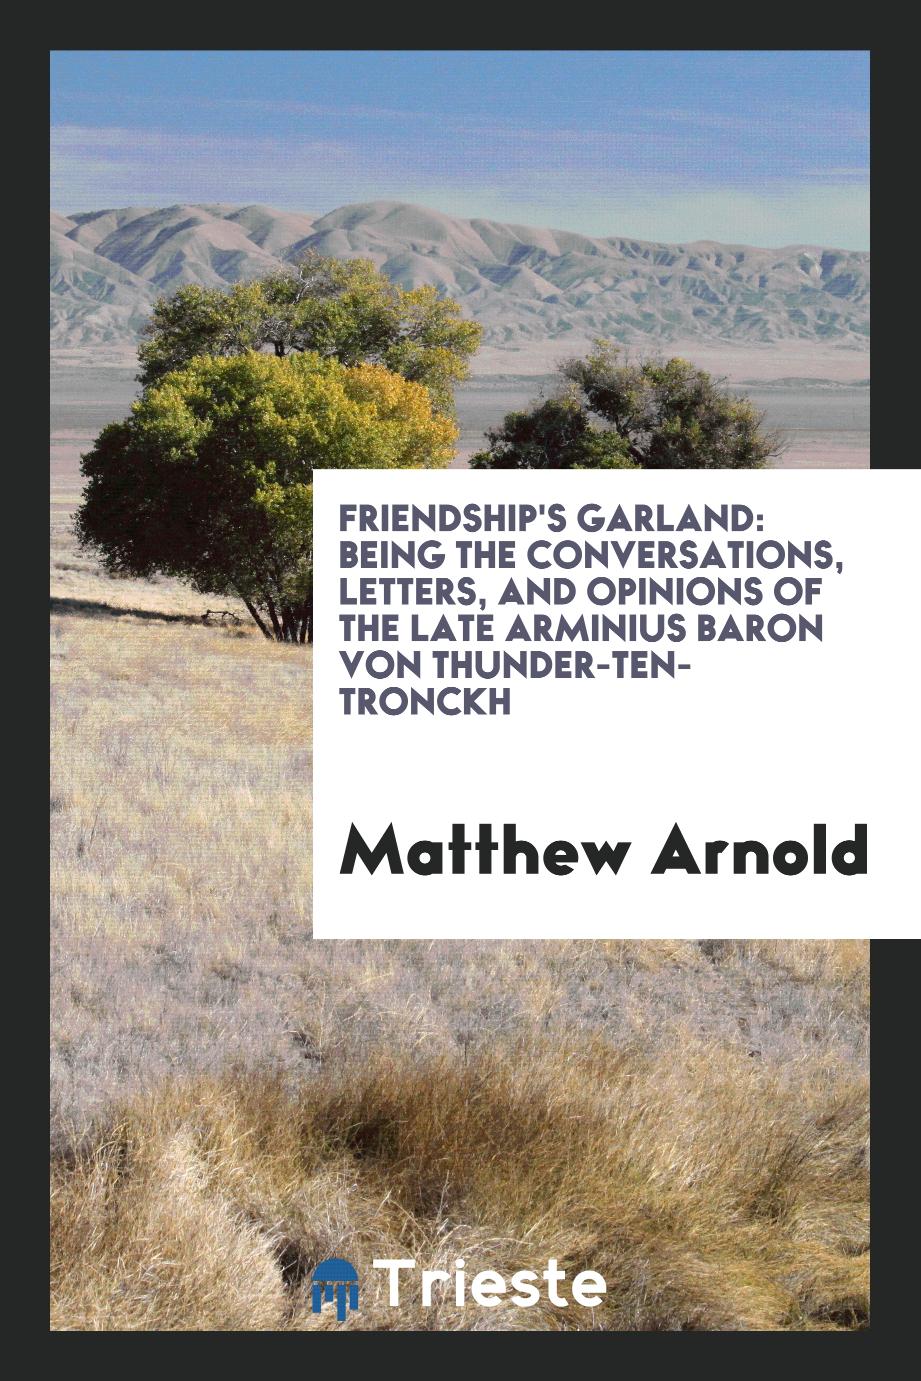 Friendship's Garland: Being the Conversations, Letters, and Opinions of the Late Arminius Baron von Thunder-Ten-Tronckh